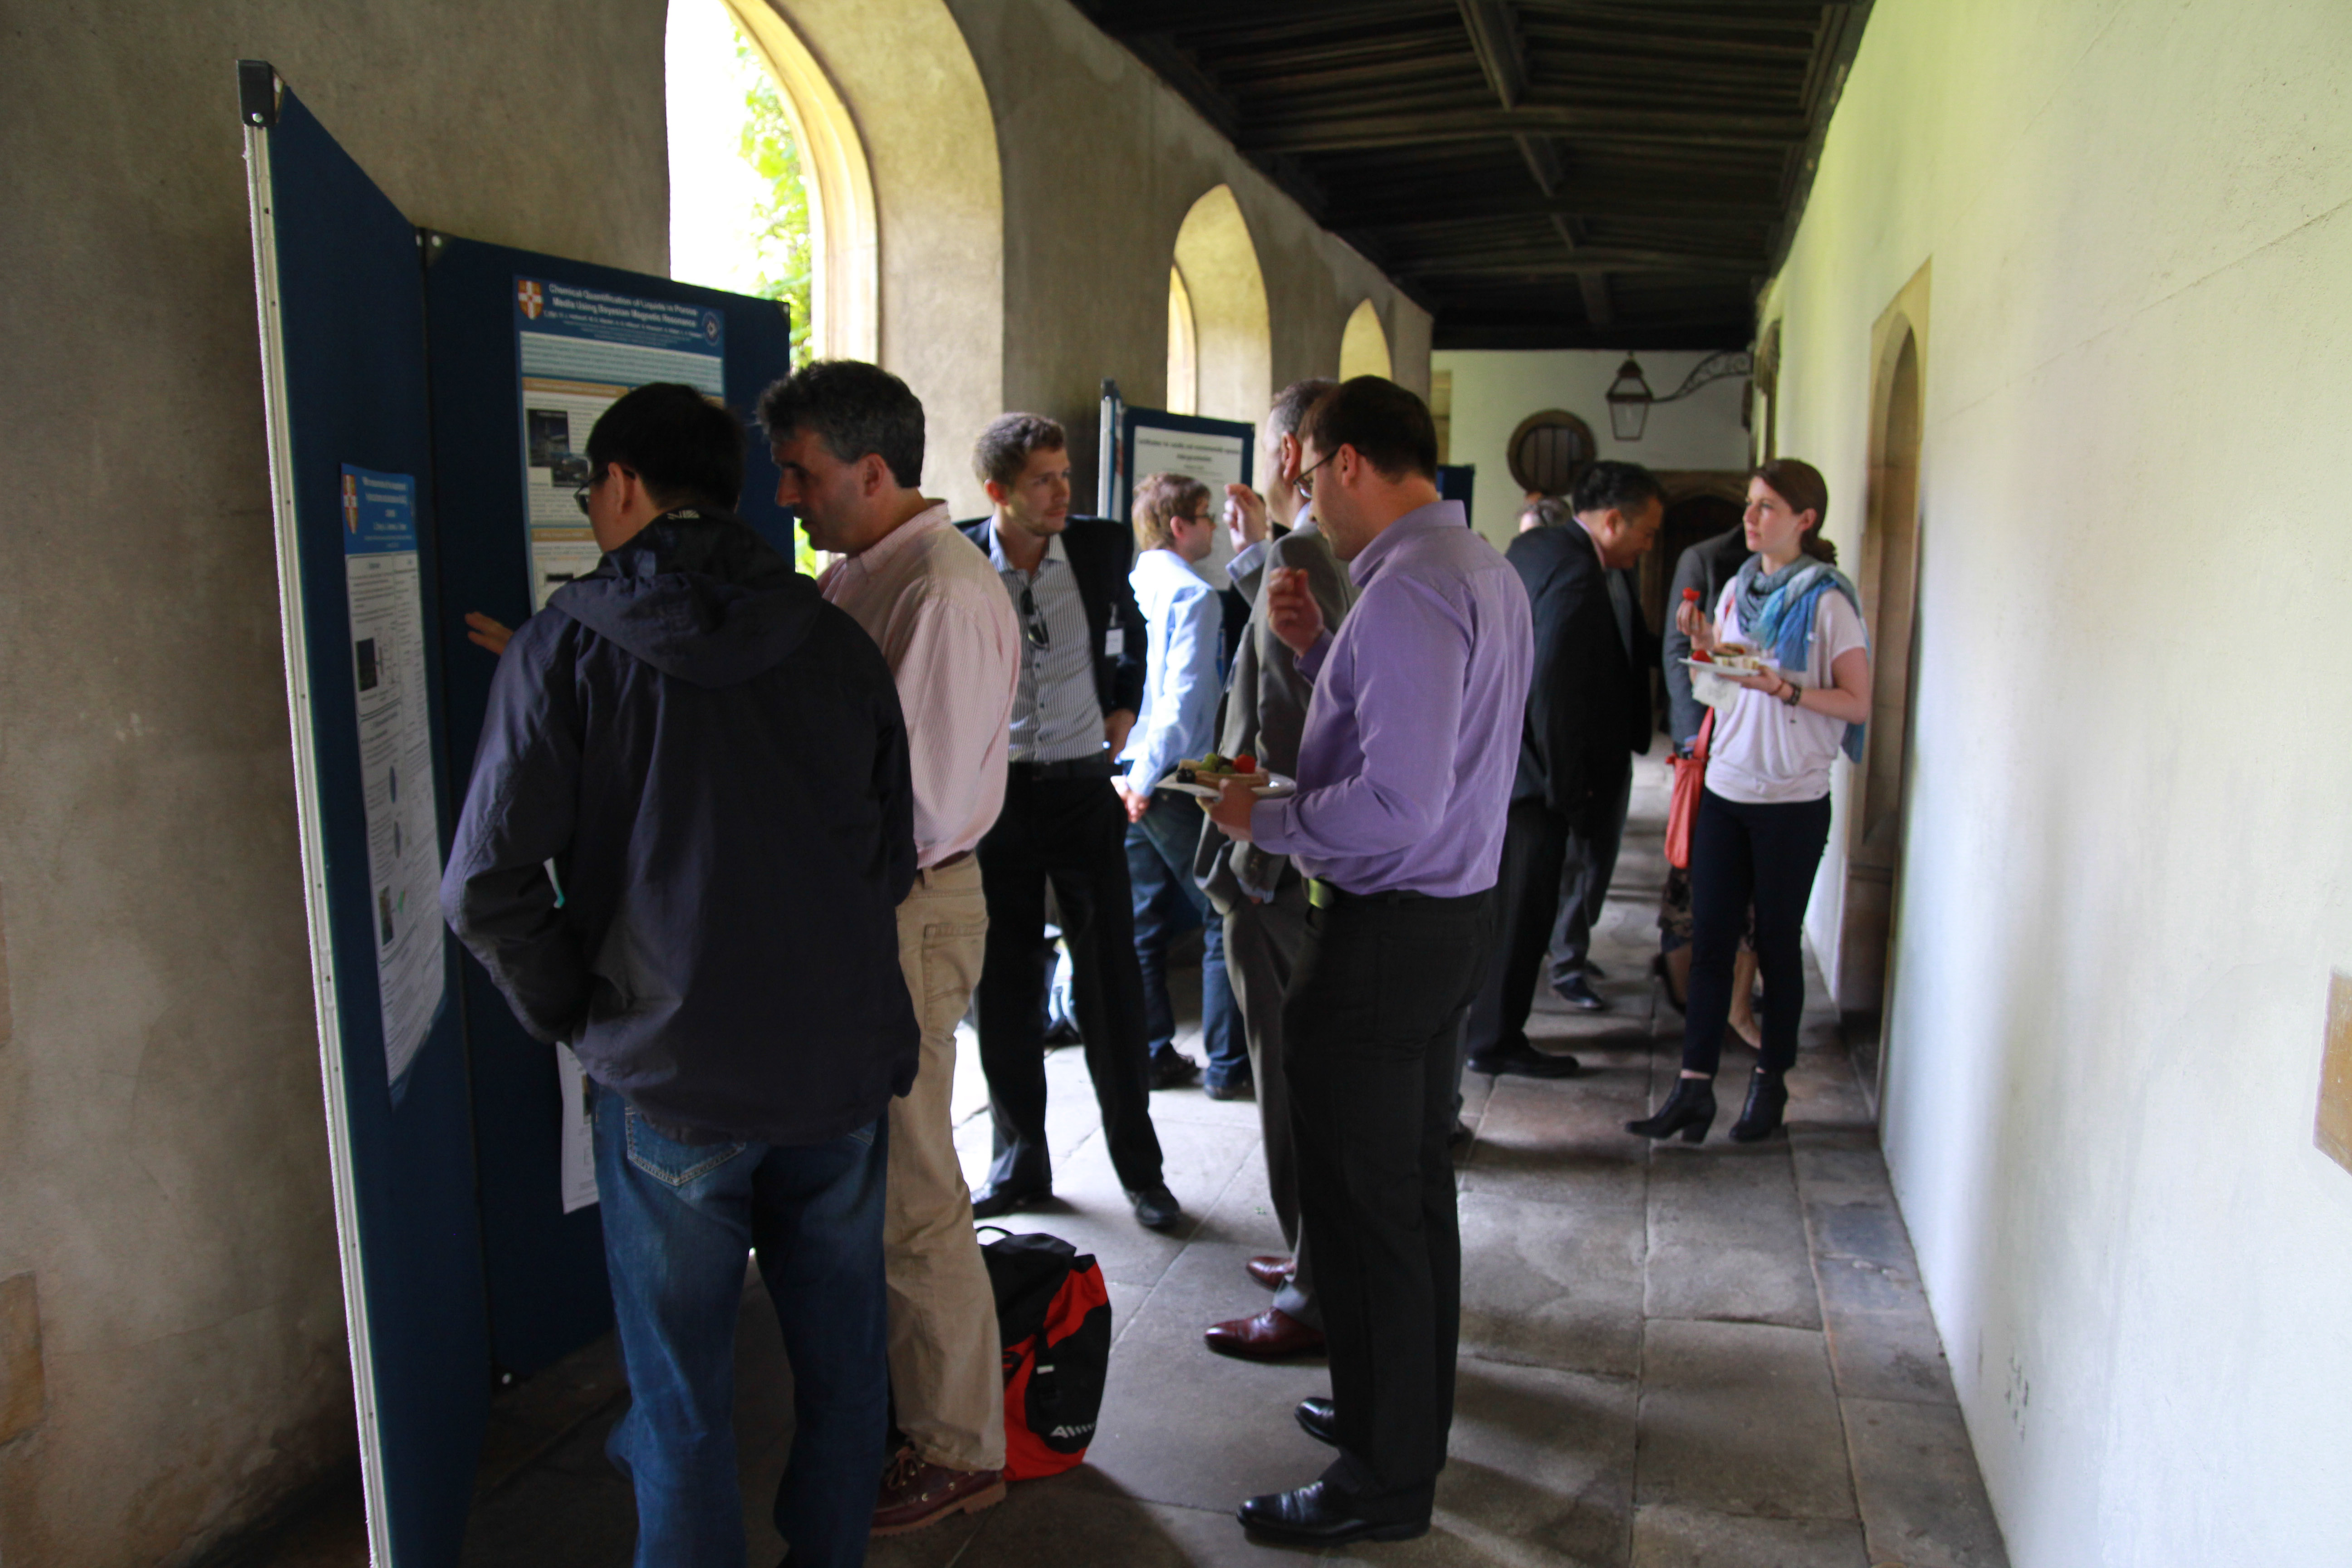 CUEN poster session